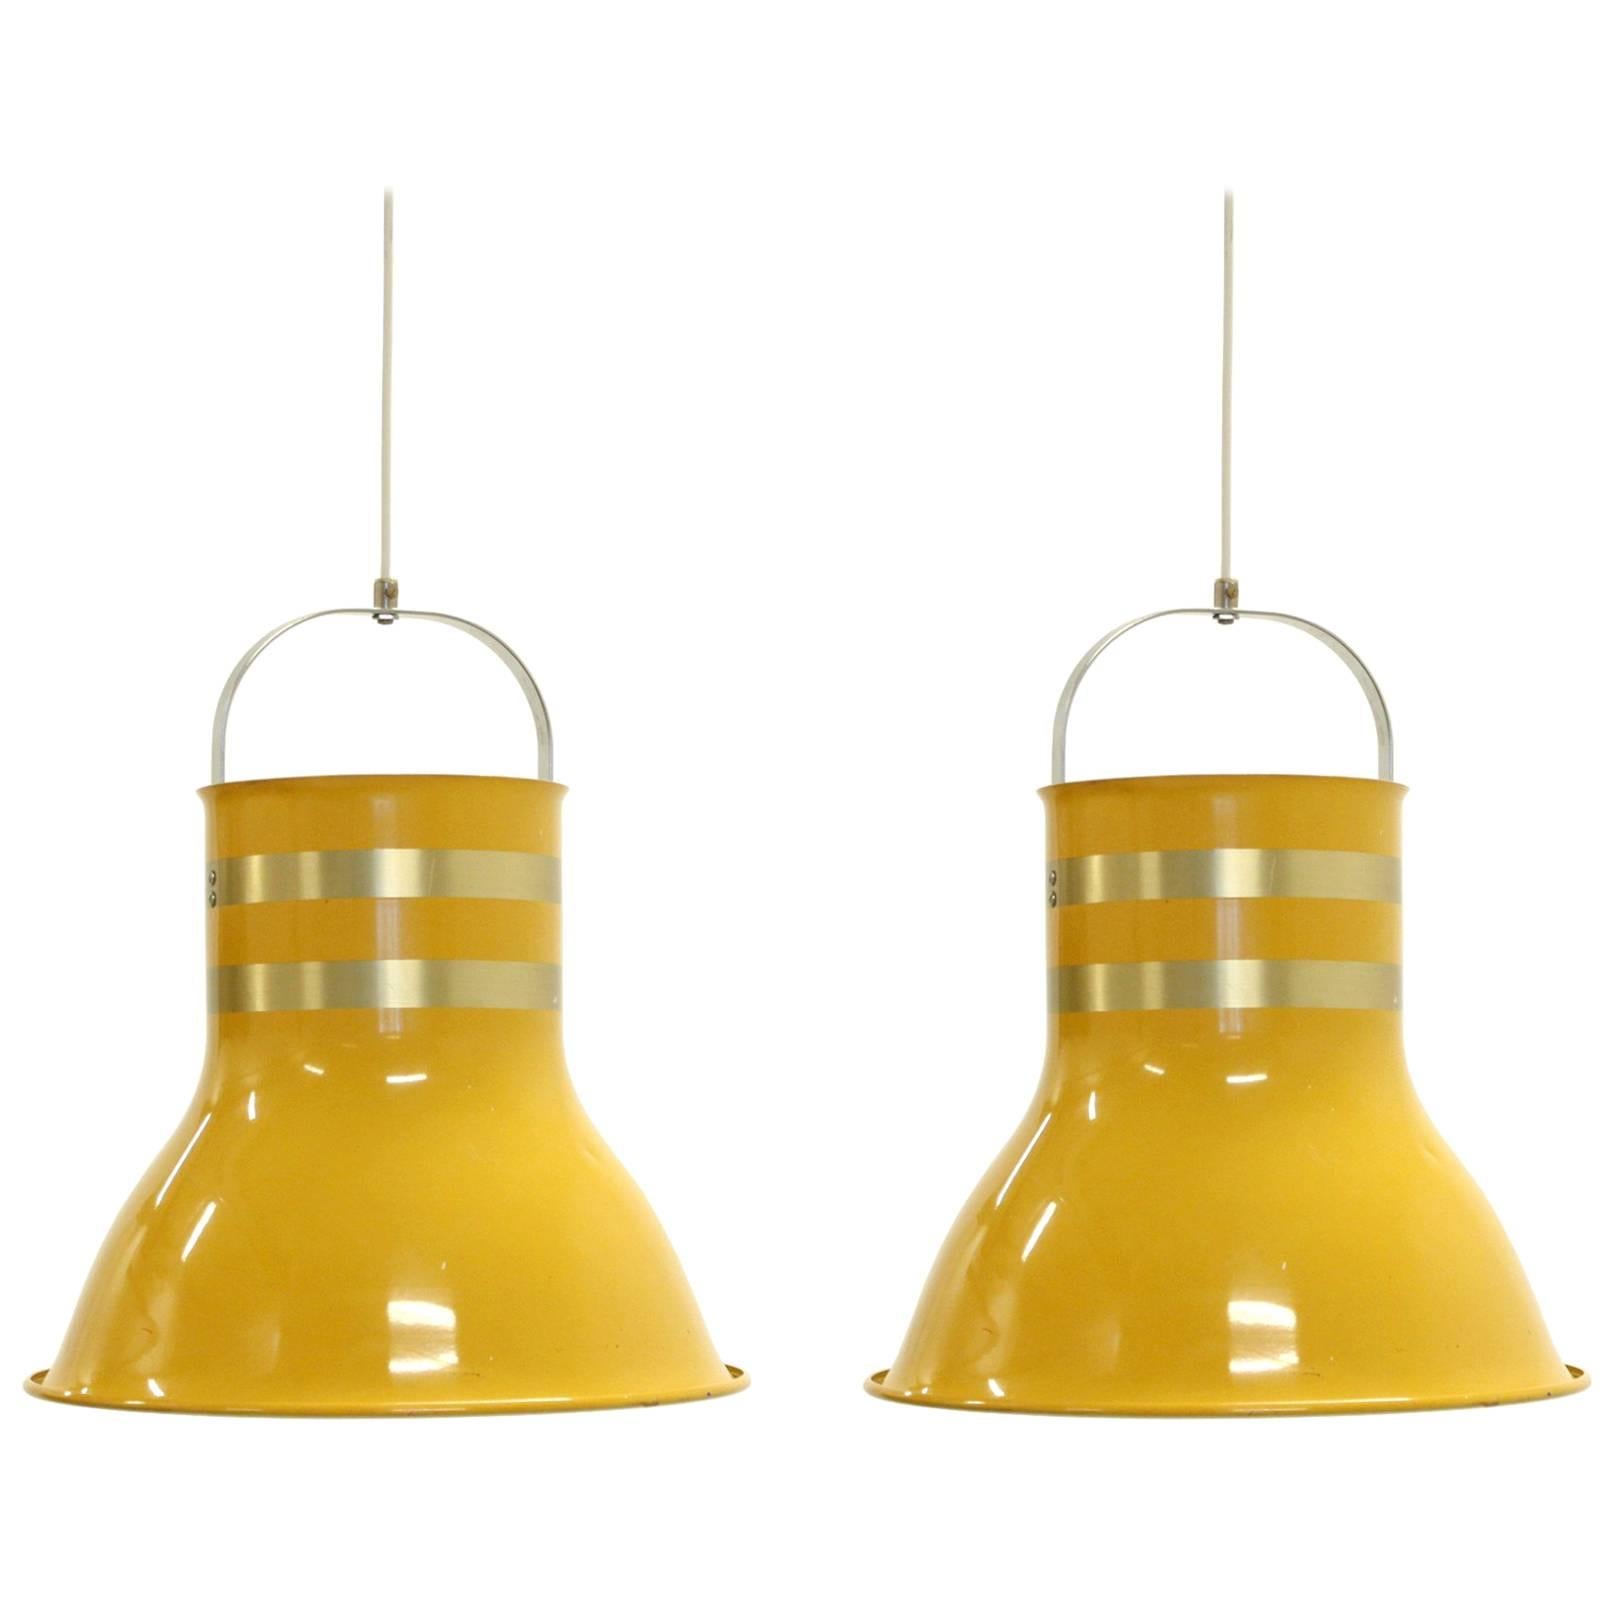 Pair of Large Swedish Ceiling Lights by Per Sundstedt for Kosta, 1970s